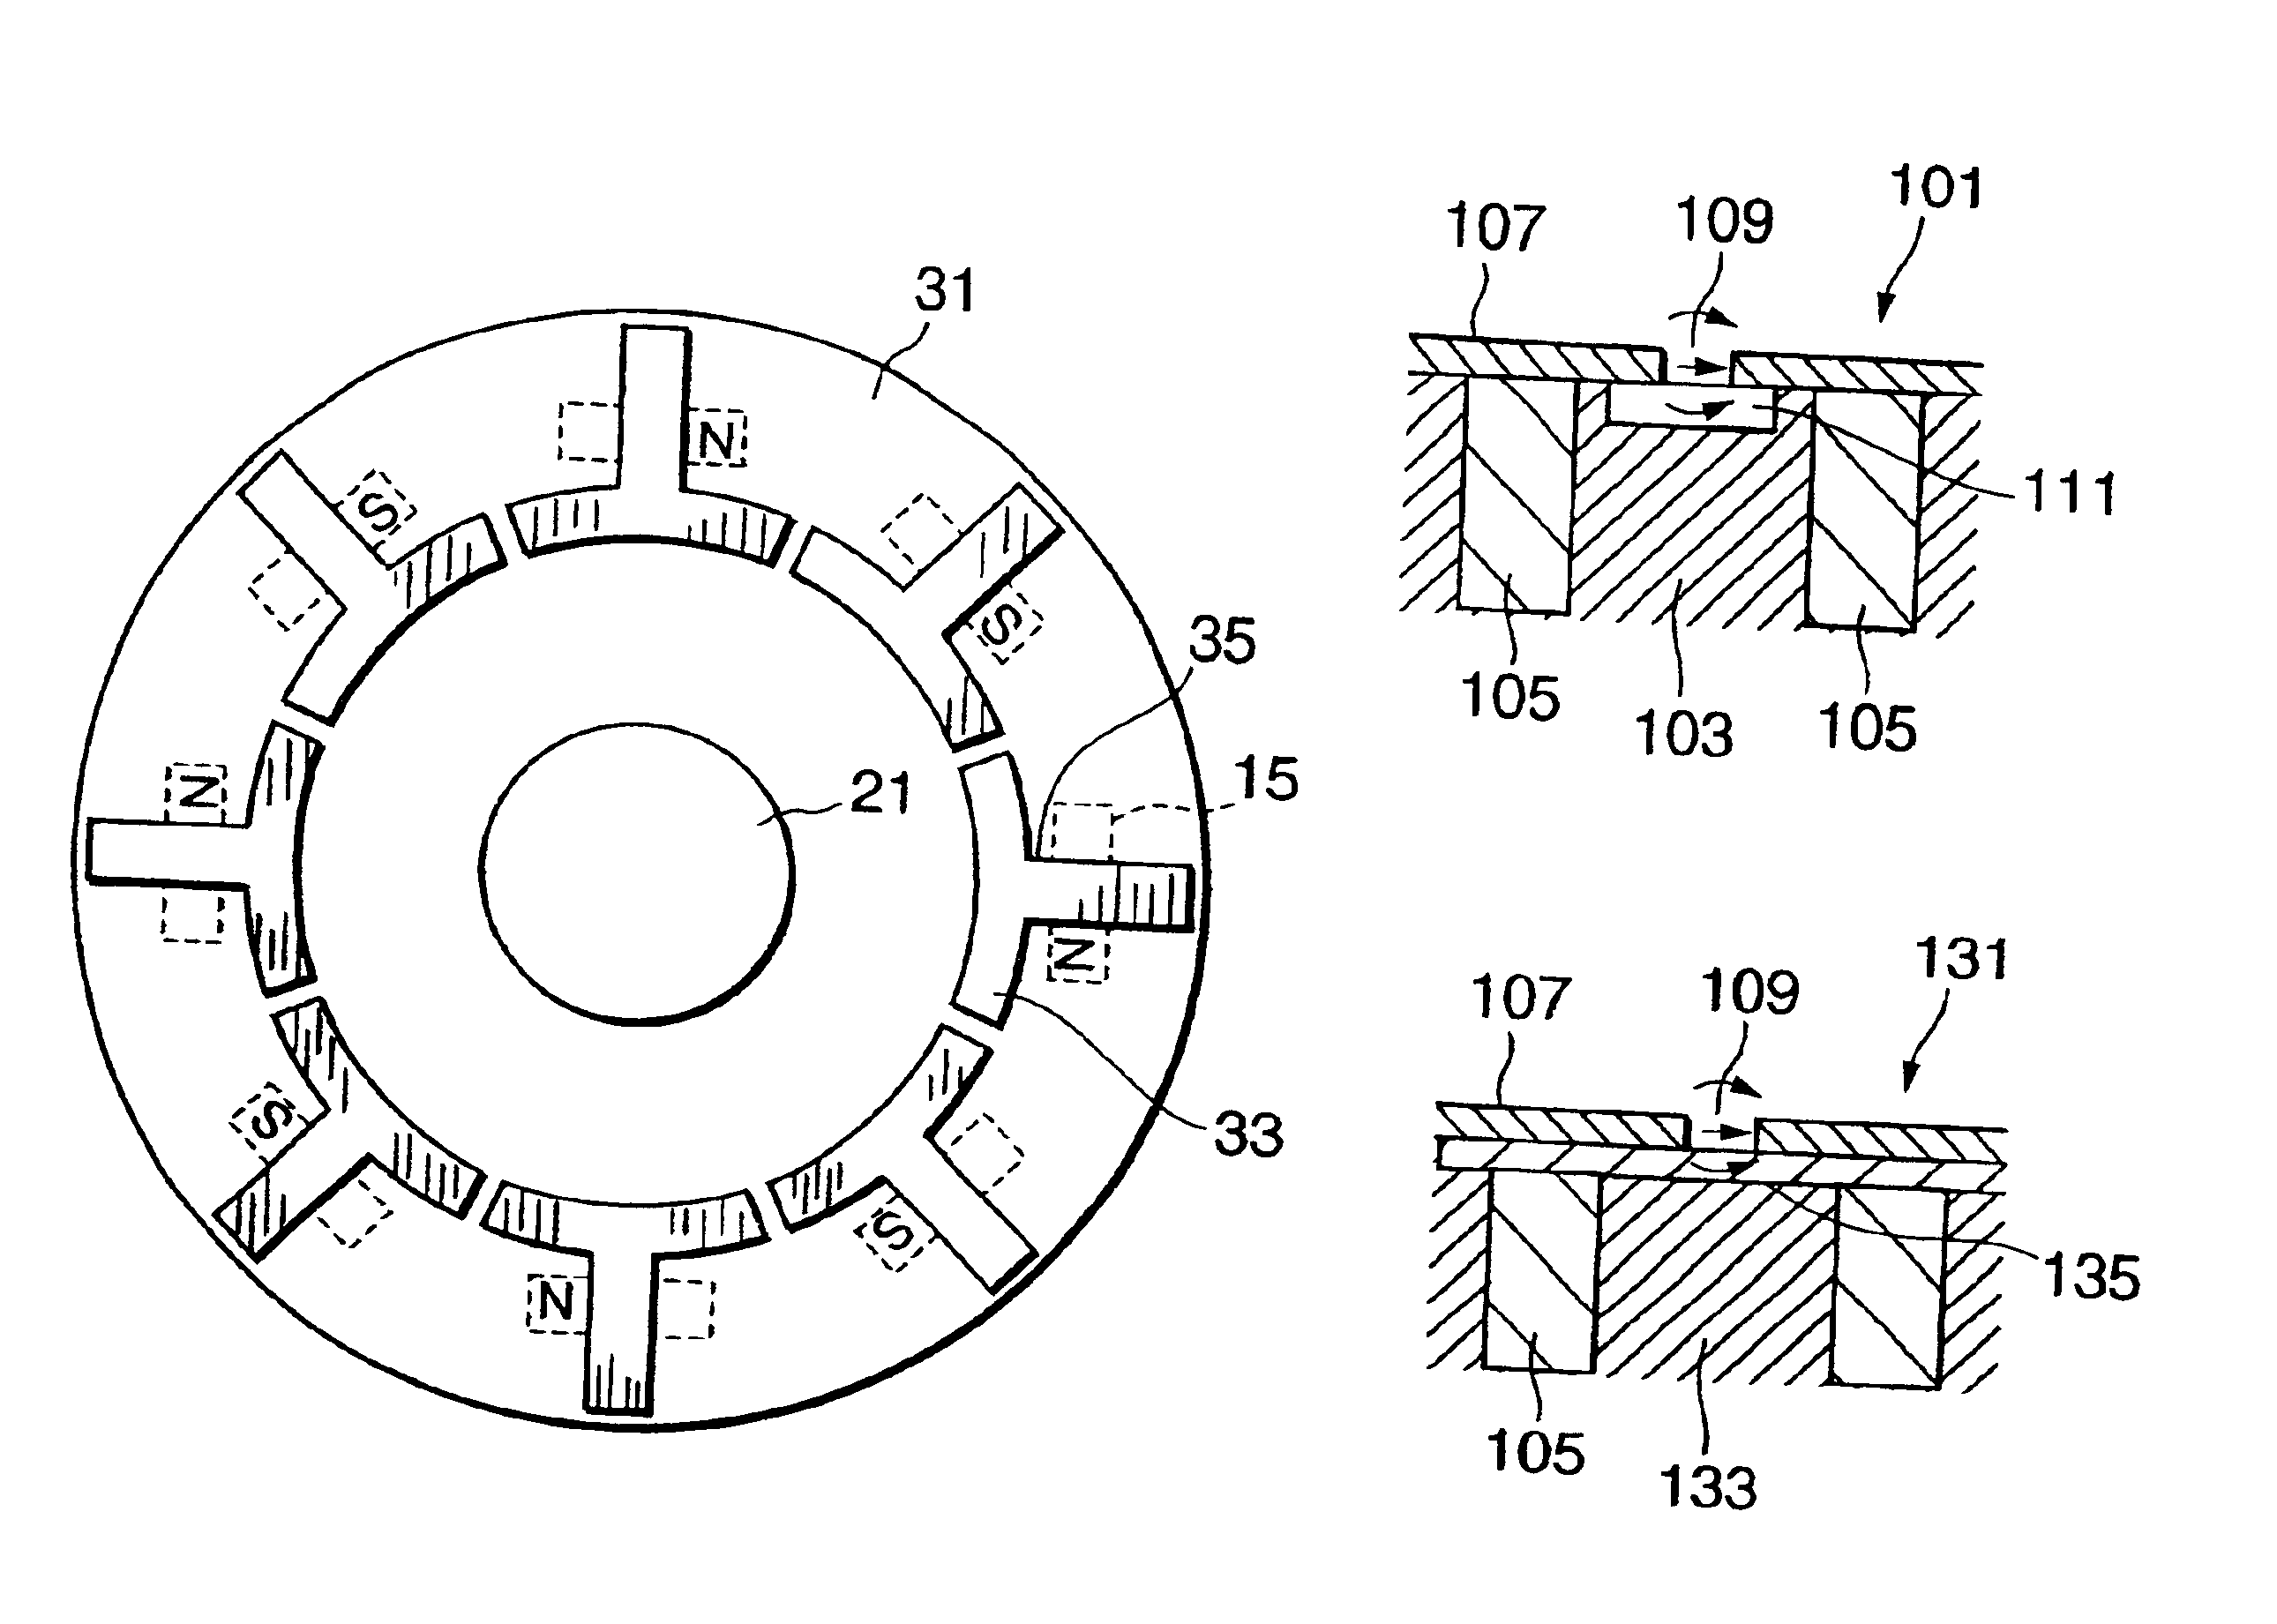 Magnetic pole position detector for rotor